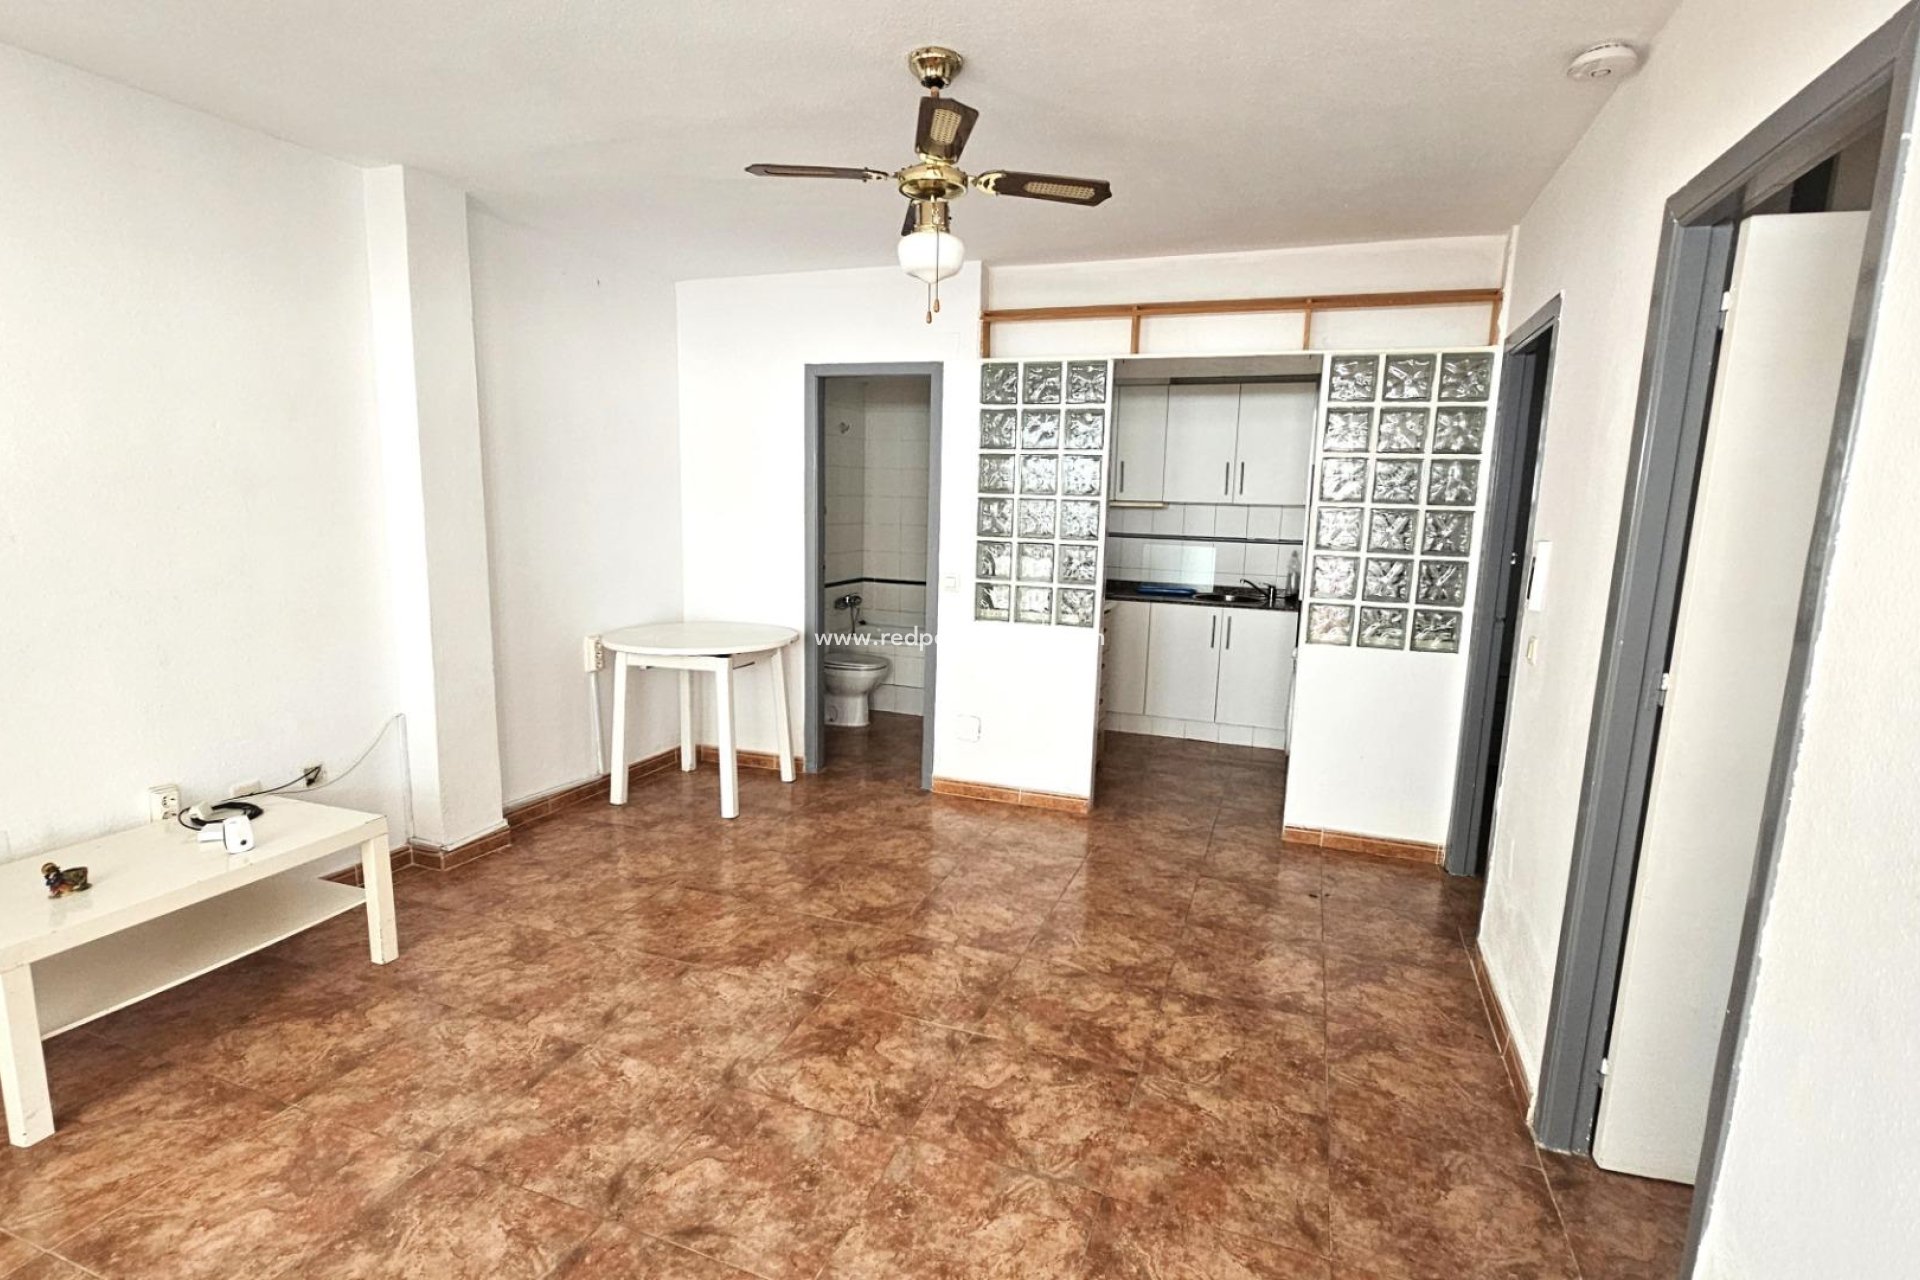 Resale - Bungalow -
Torrevieja - Doña ines